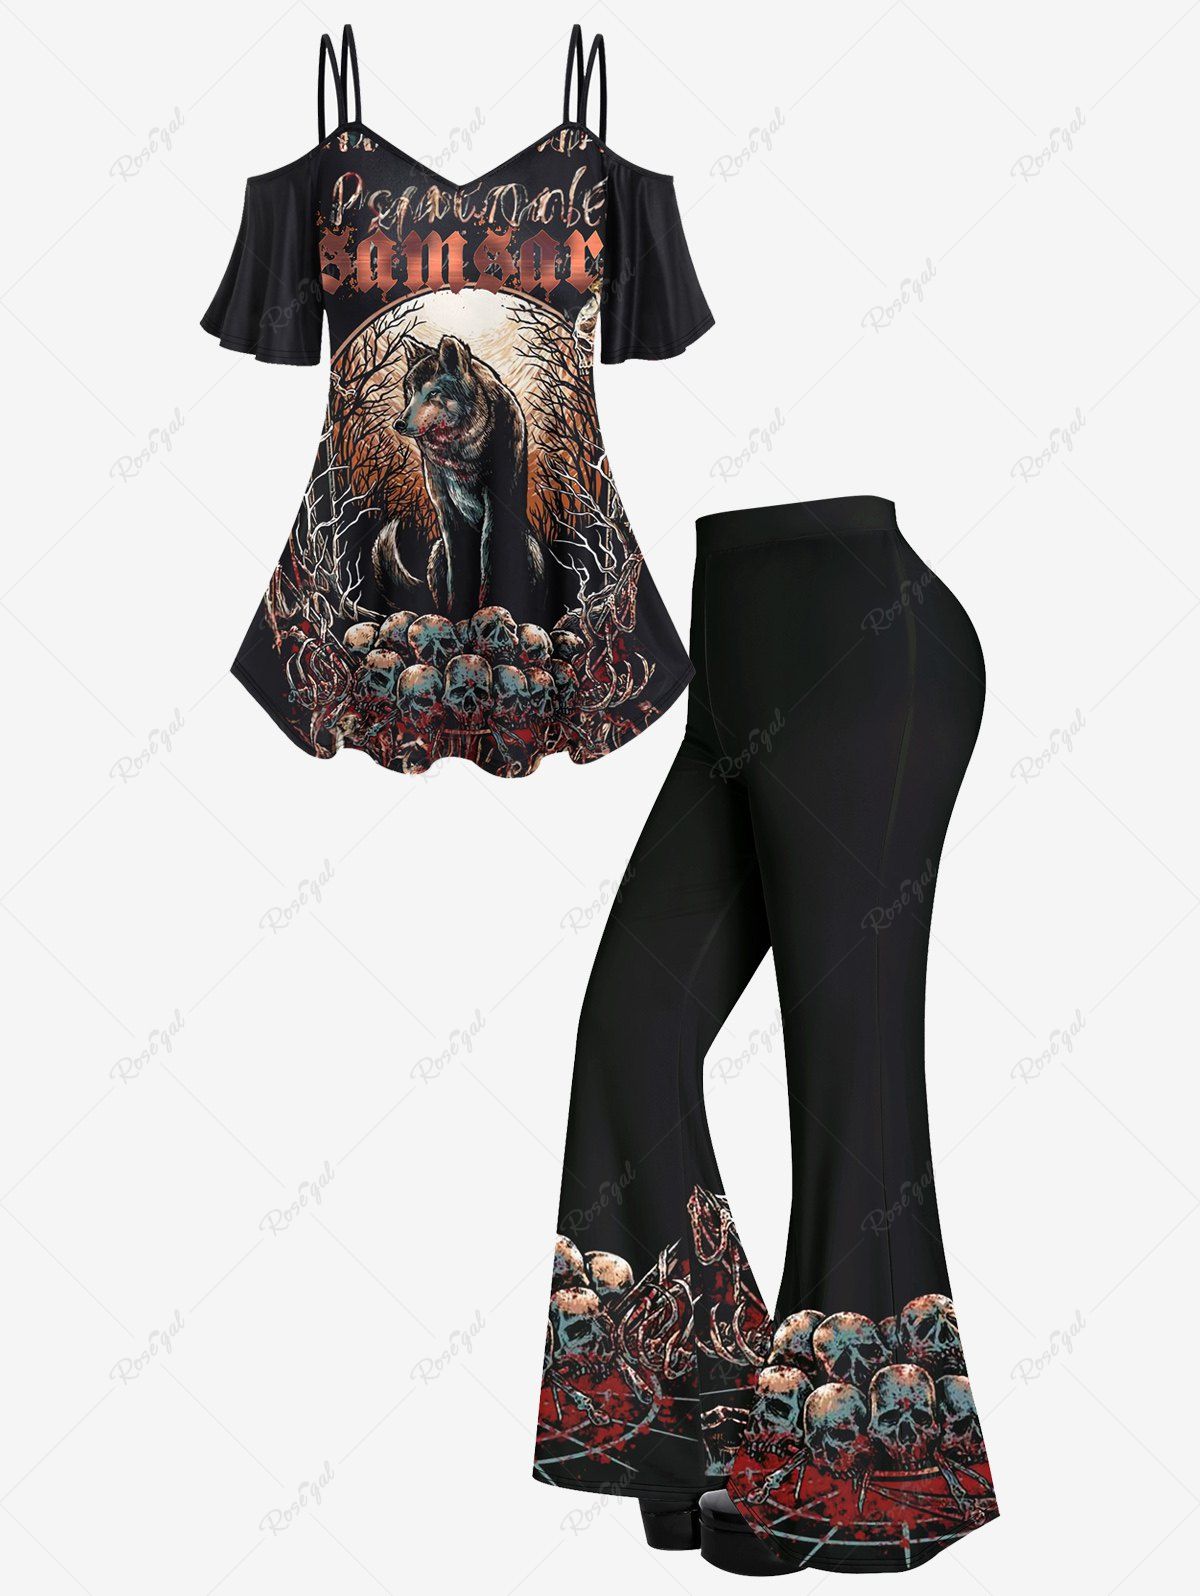 Unique Wolf Tree Skulls Print Cold Shoulder Cami T-shirt And Skulls Bloody Branch Print Flare Pants Gothic Outfit  